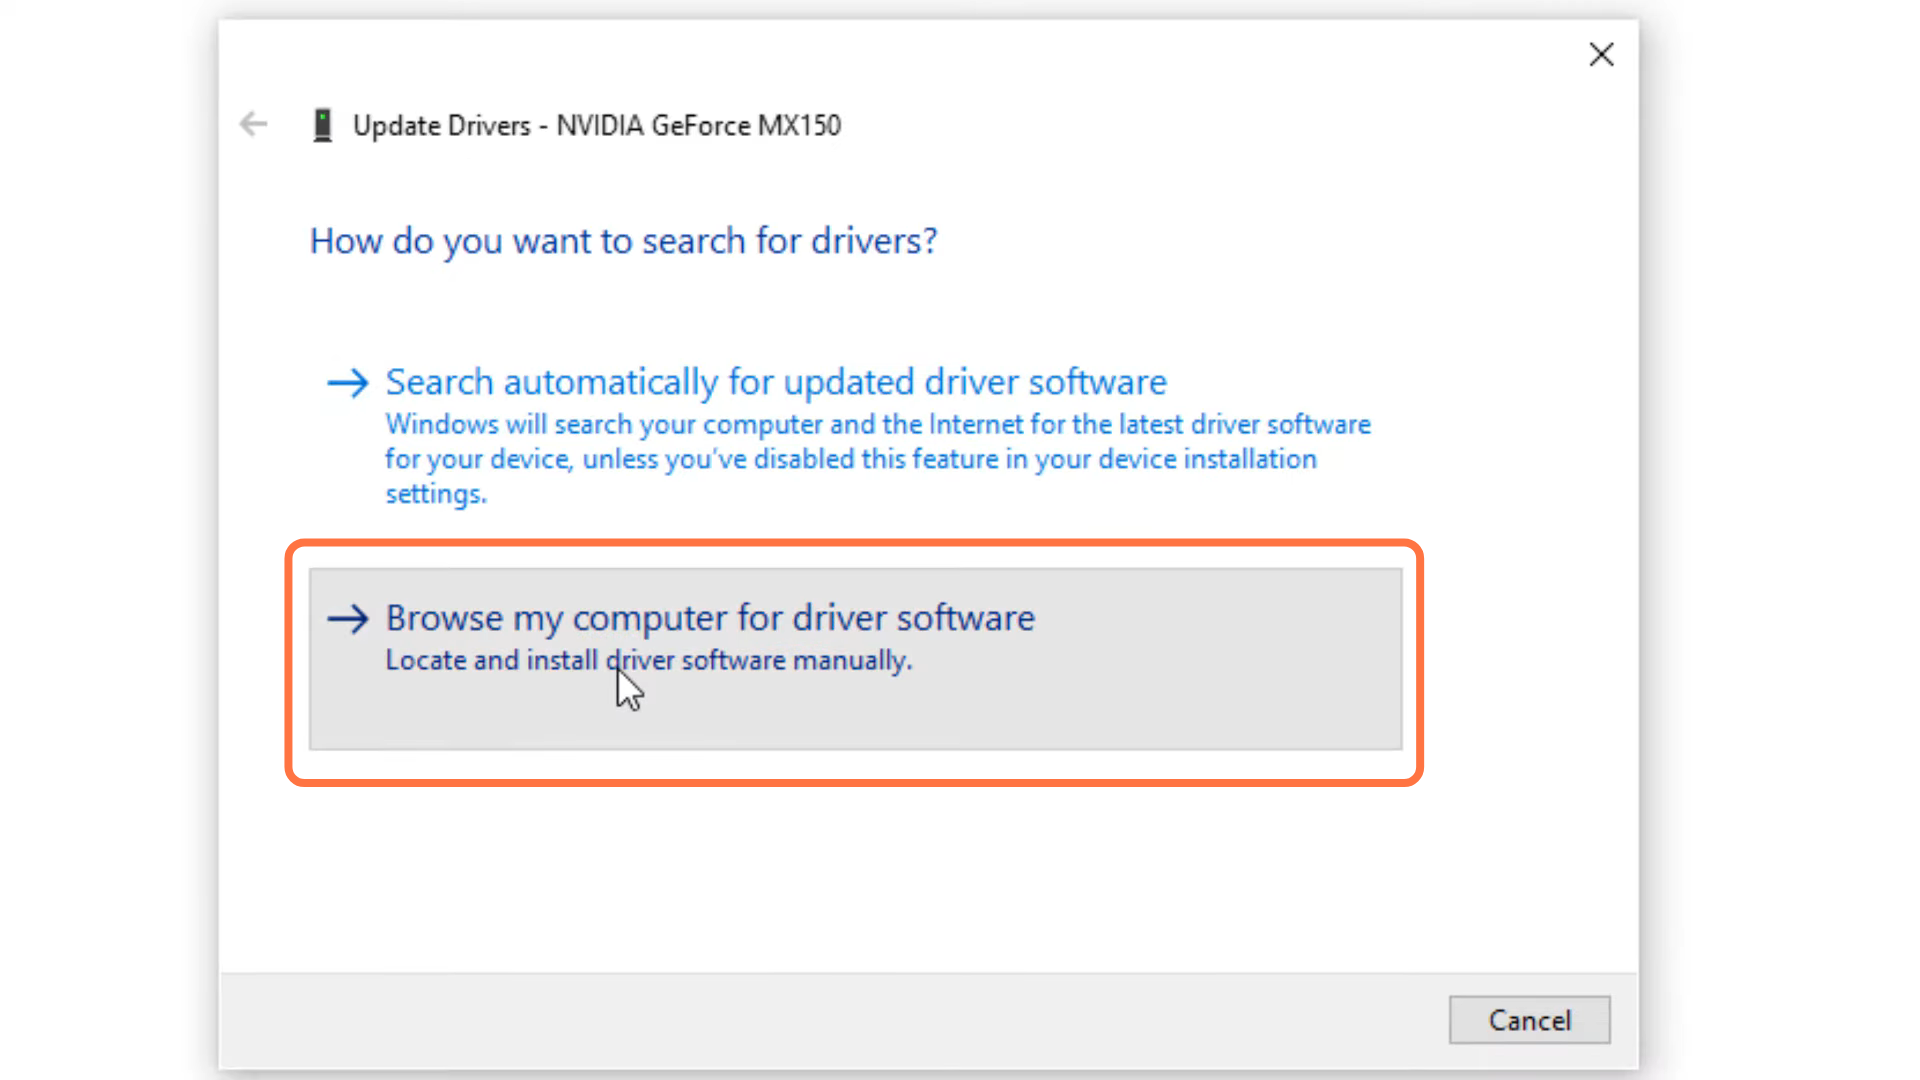 After that, click on "Browse my computer for driver software". 